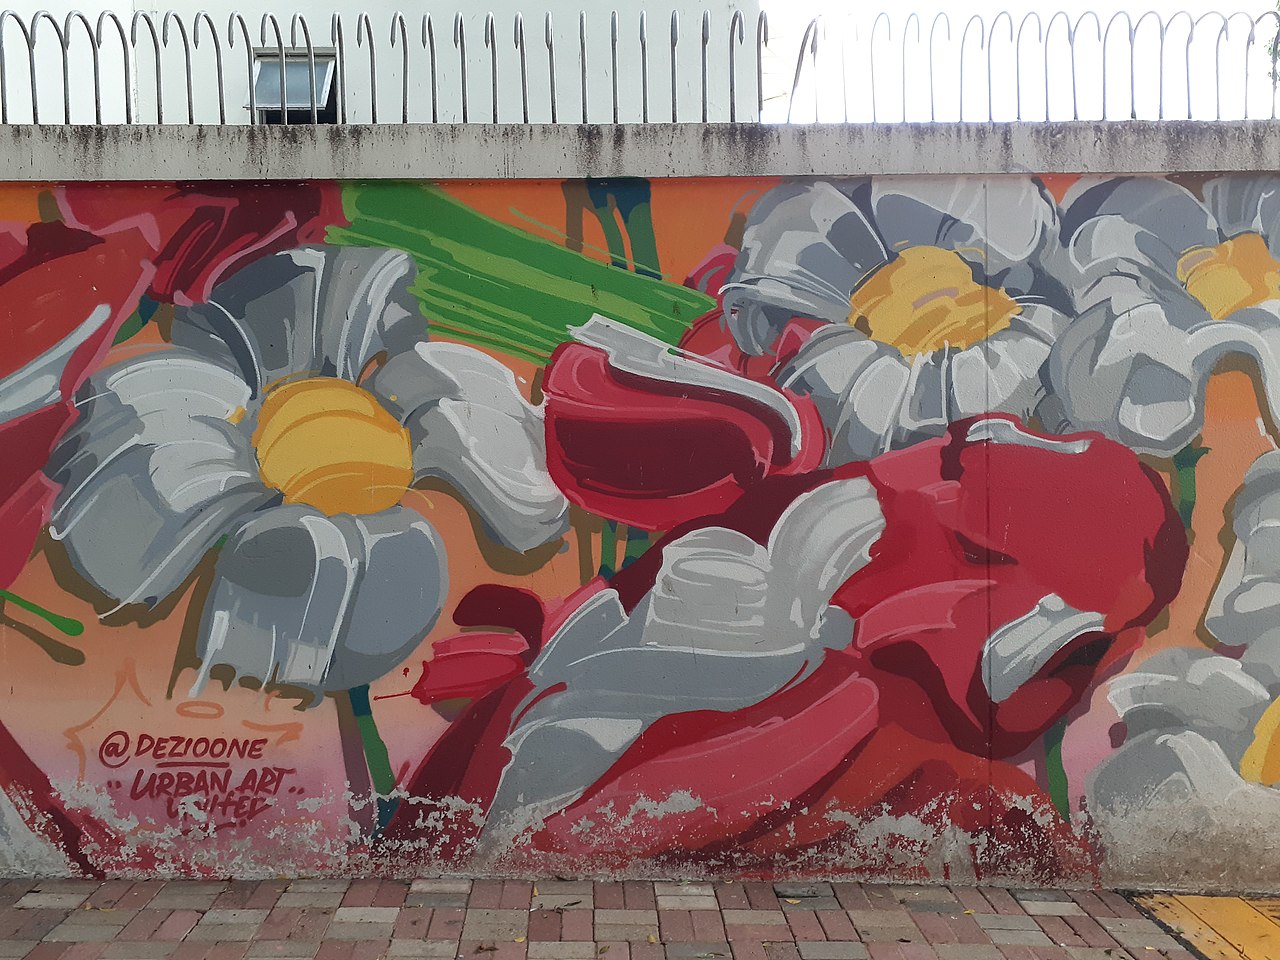 A mural showing white-petaled flowers interspersed with red and green strokes on a school wall.